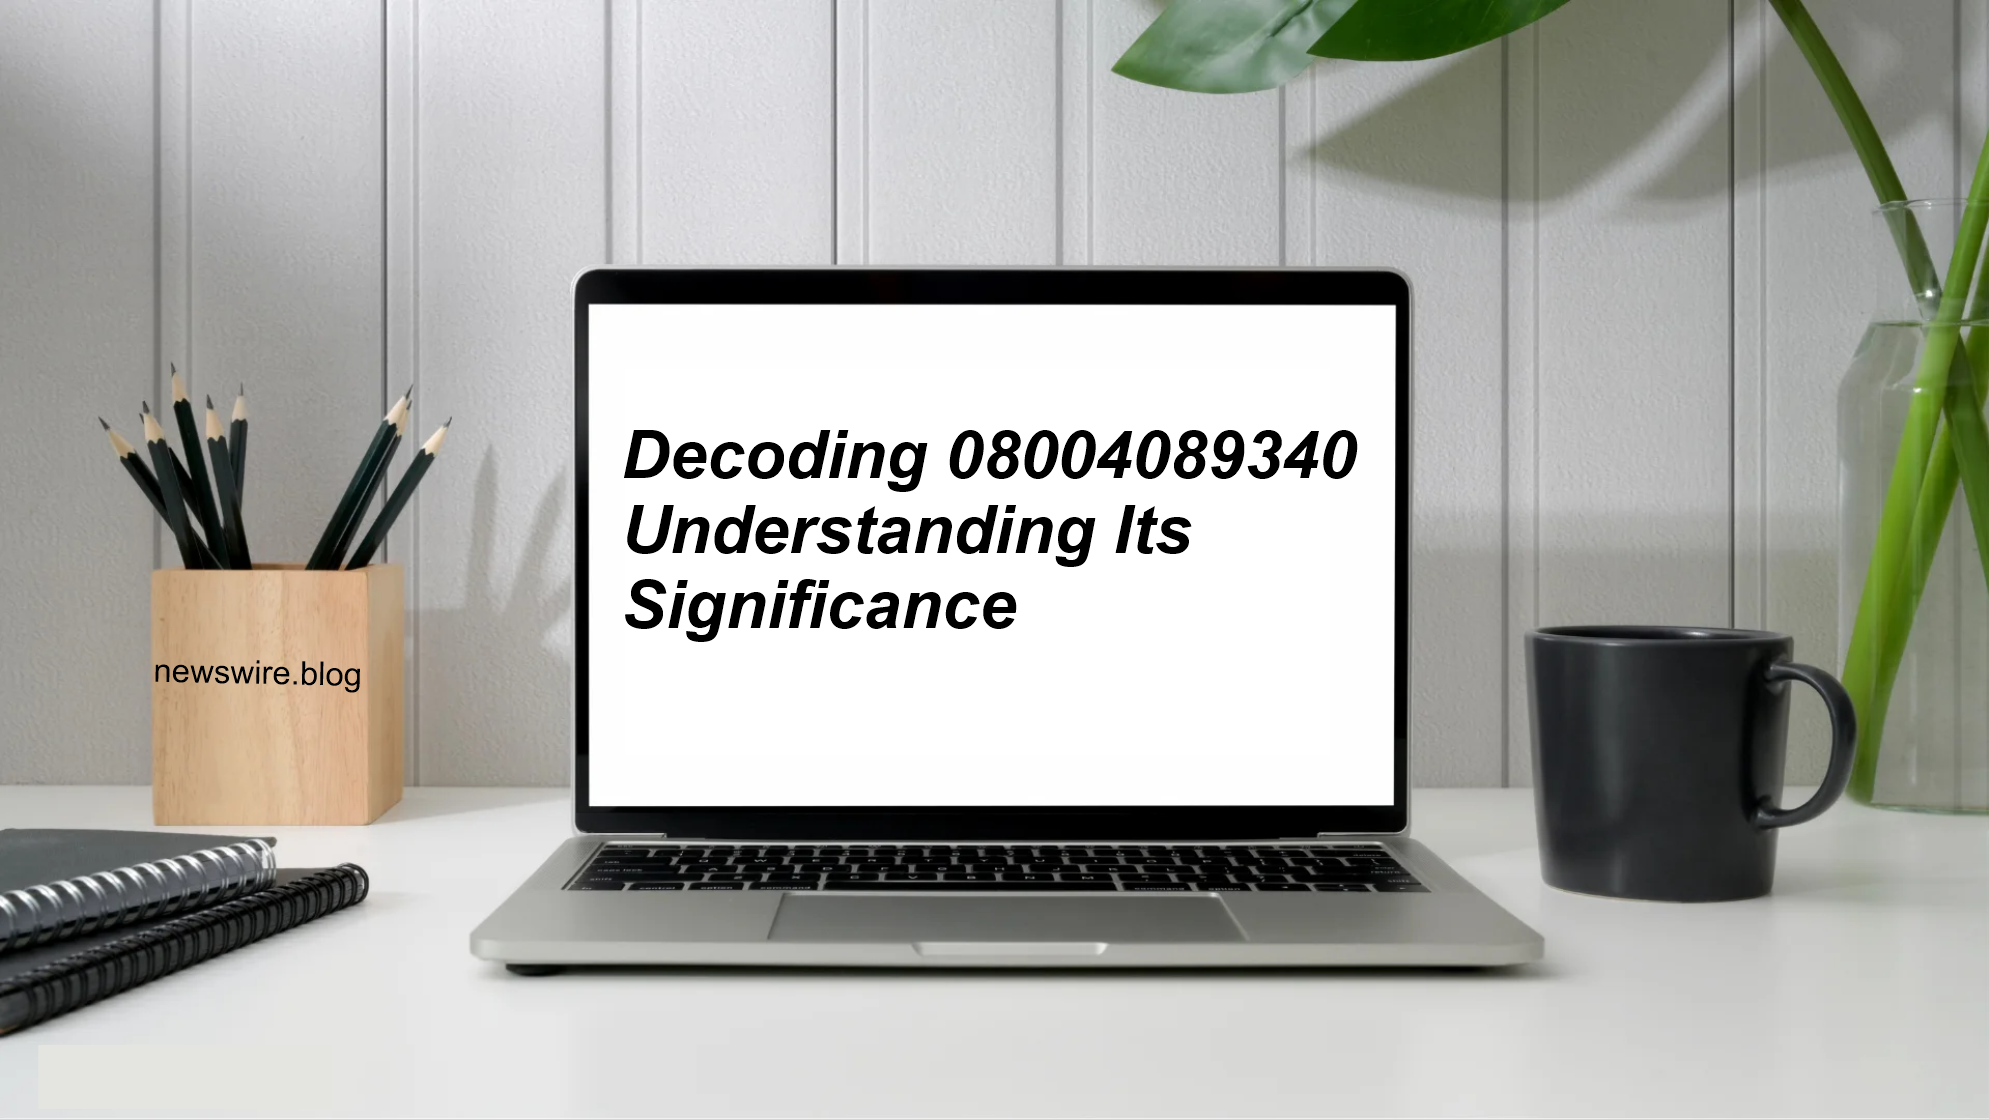 Decoding 08004089340 Understanding Its Significance